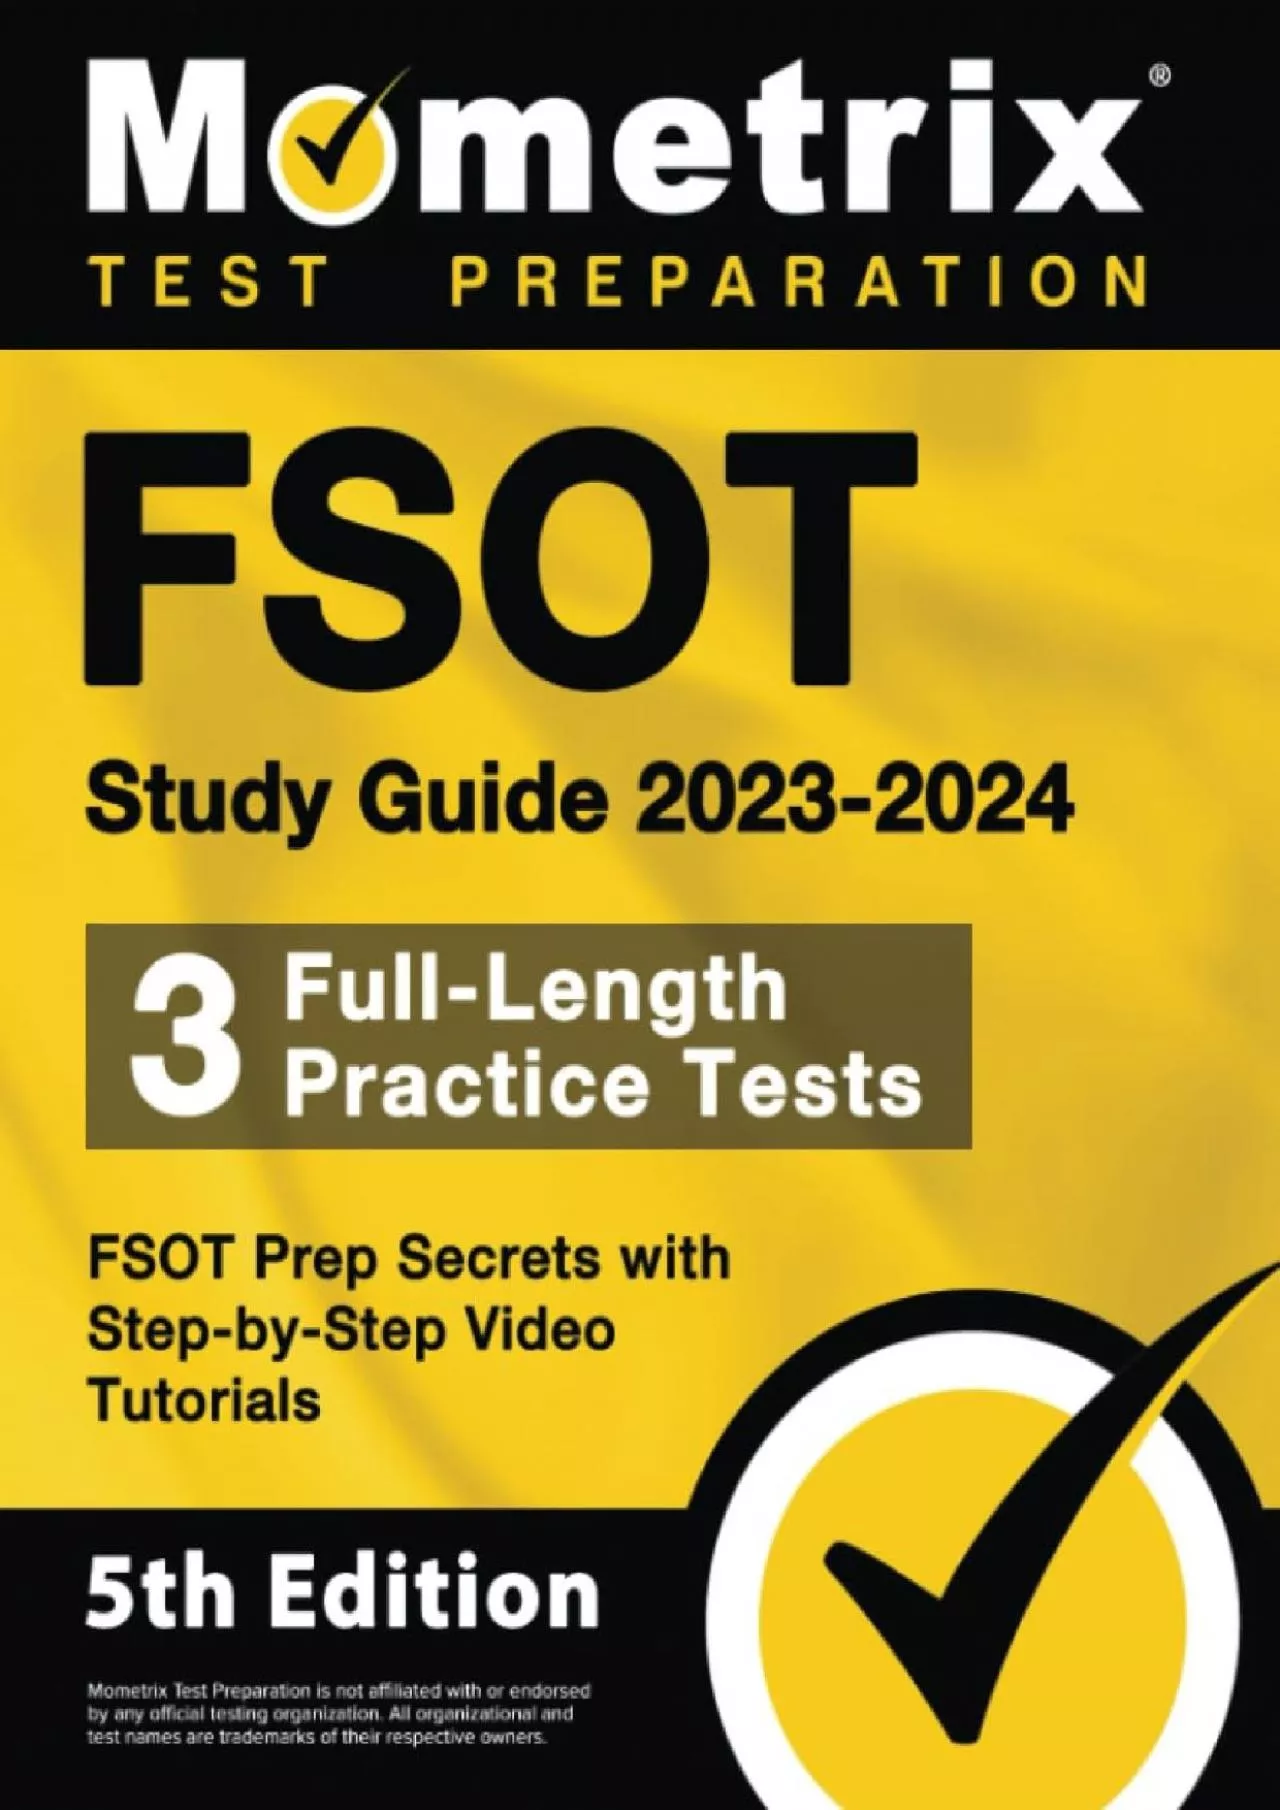 [READ] FSOT Study Guide 2023-2024 - 3 Full-Length Practice Tests, FSOT Prep Secrets with